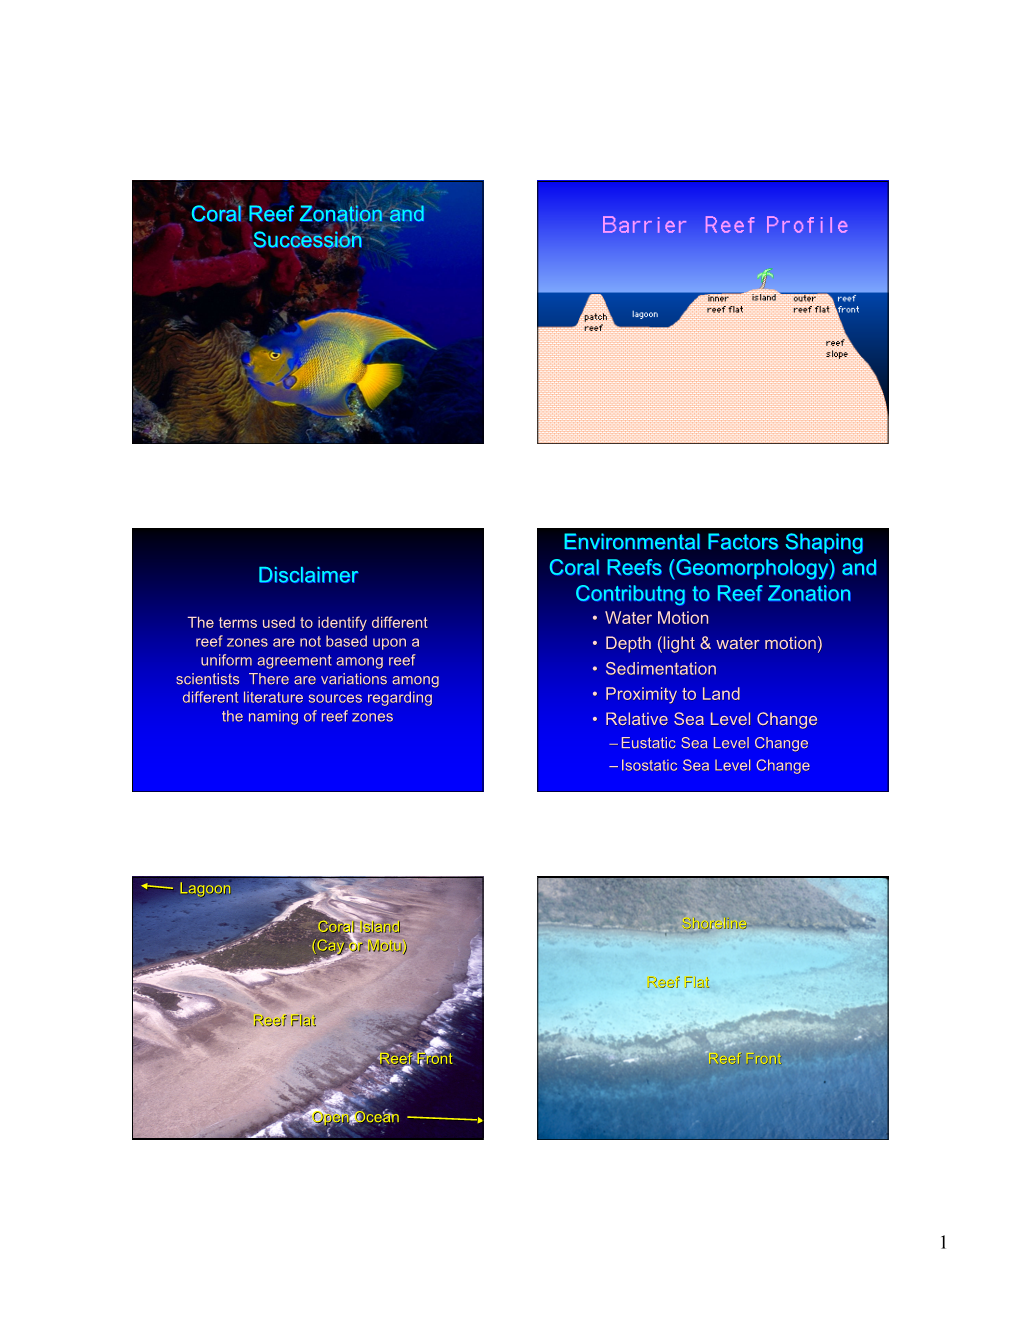 Coral Reef Zonation and Succession Barrier Reef Profile Disclaimer